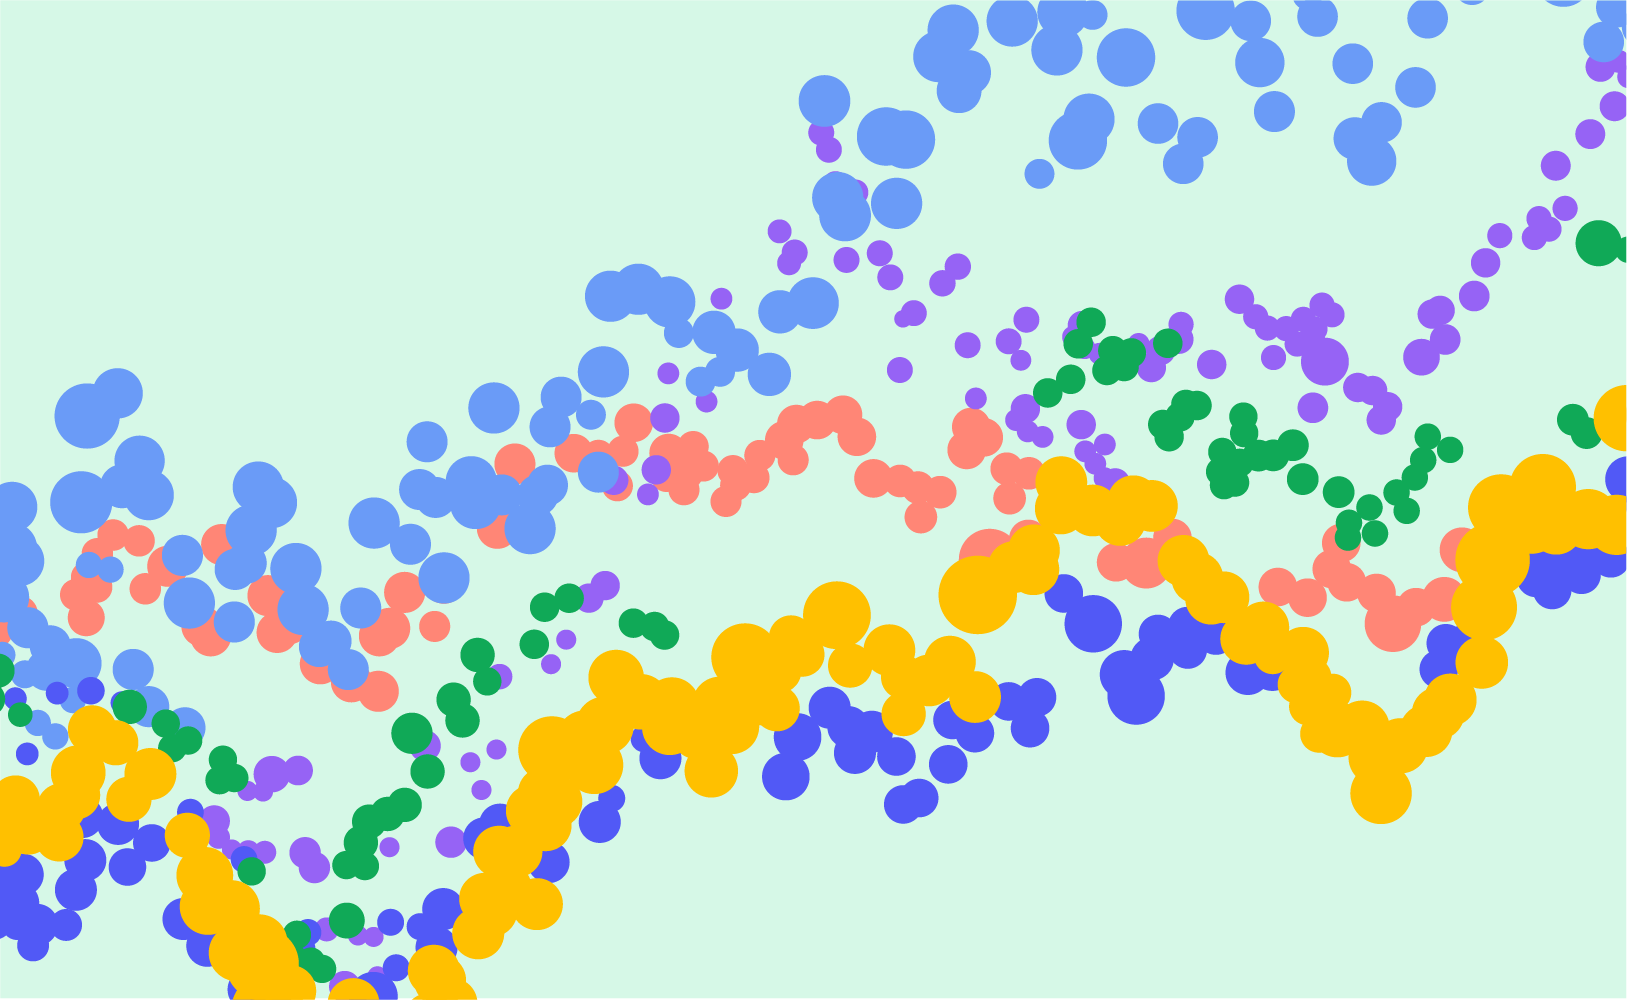 Much faster visualizations of single numbers